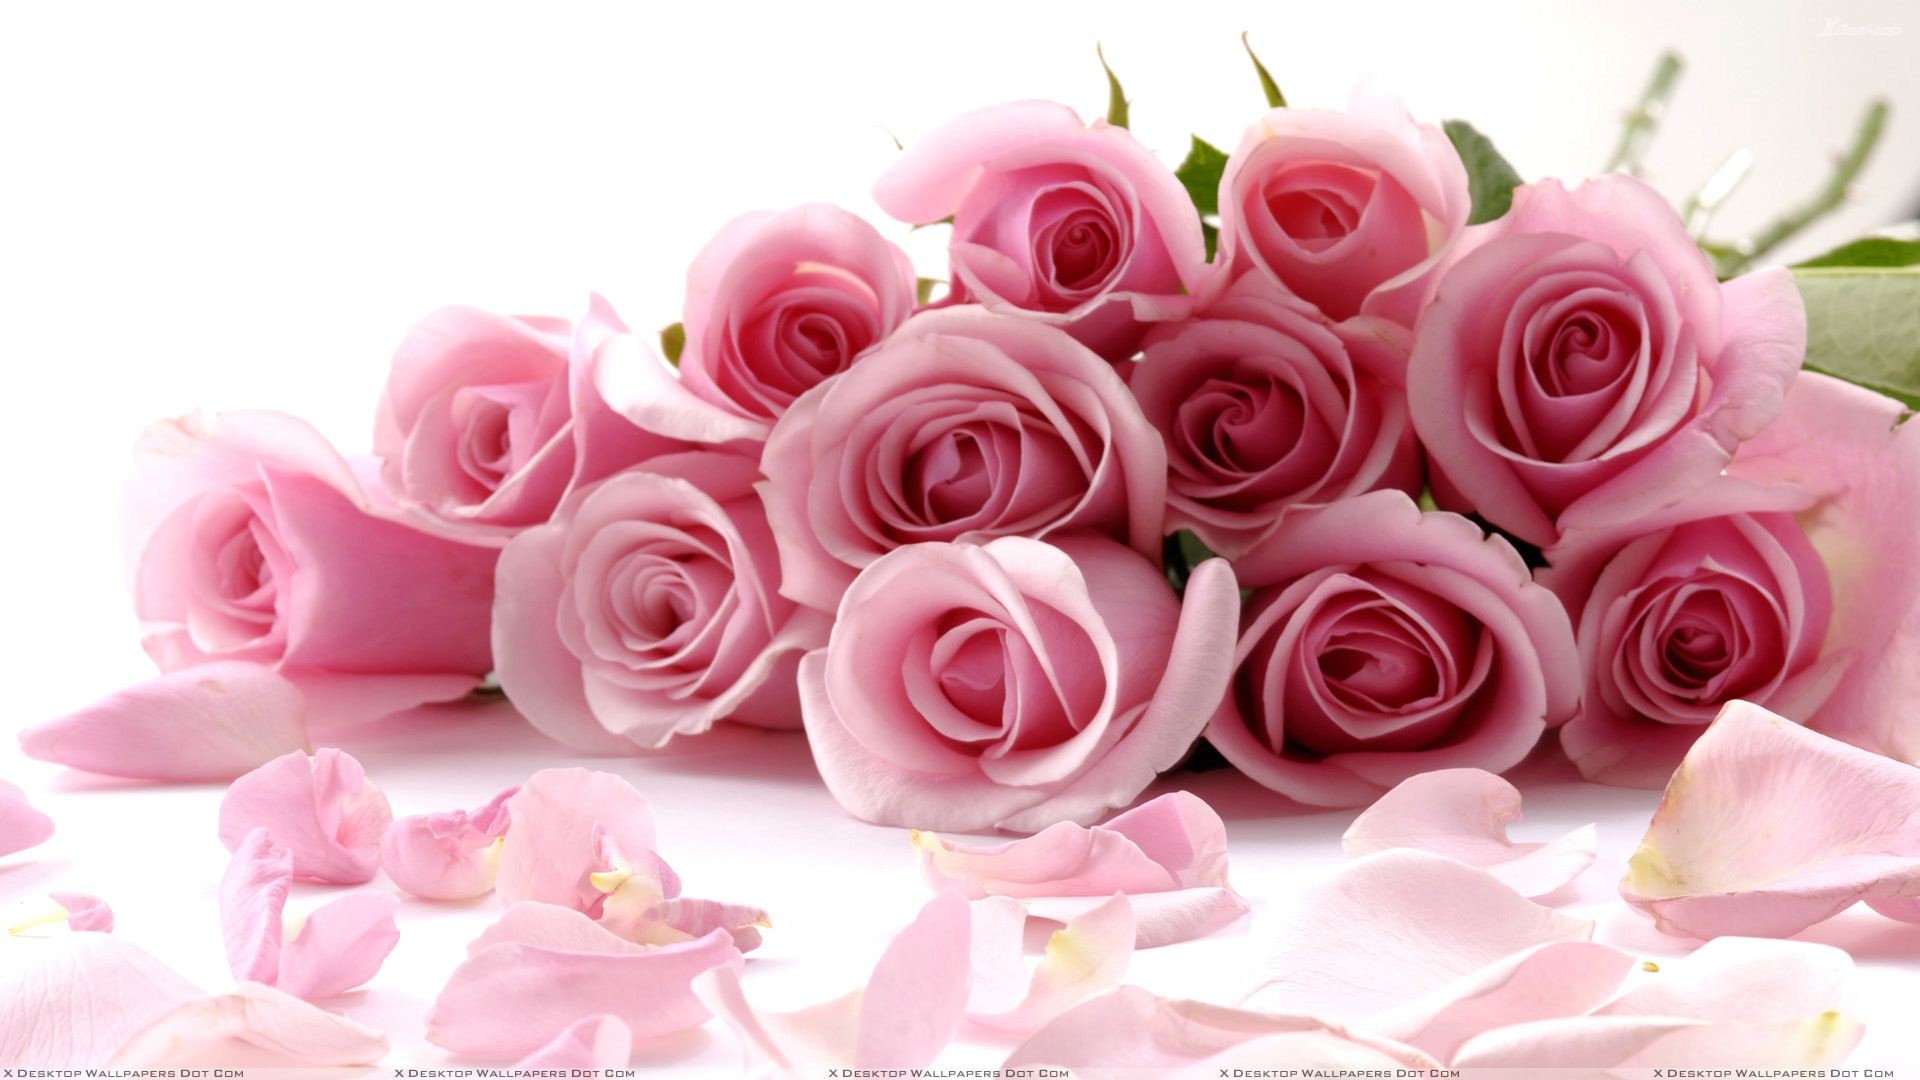 1920x1080 You are viewing wallpaper titled "Pink Roses On White Background ...